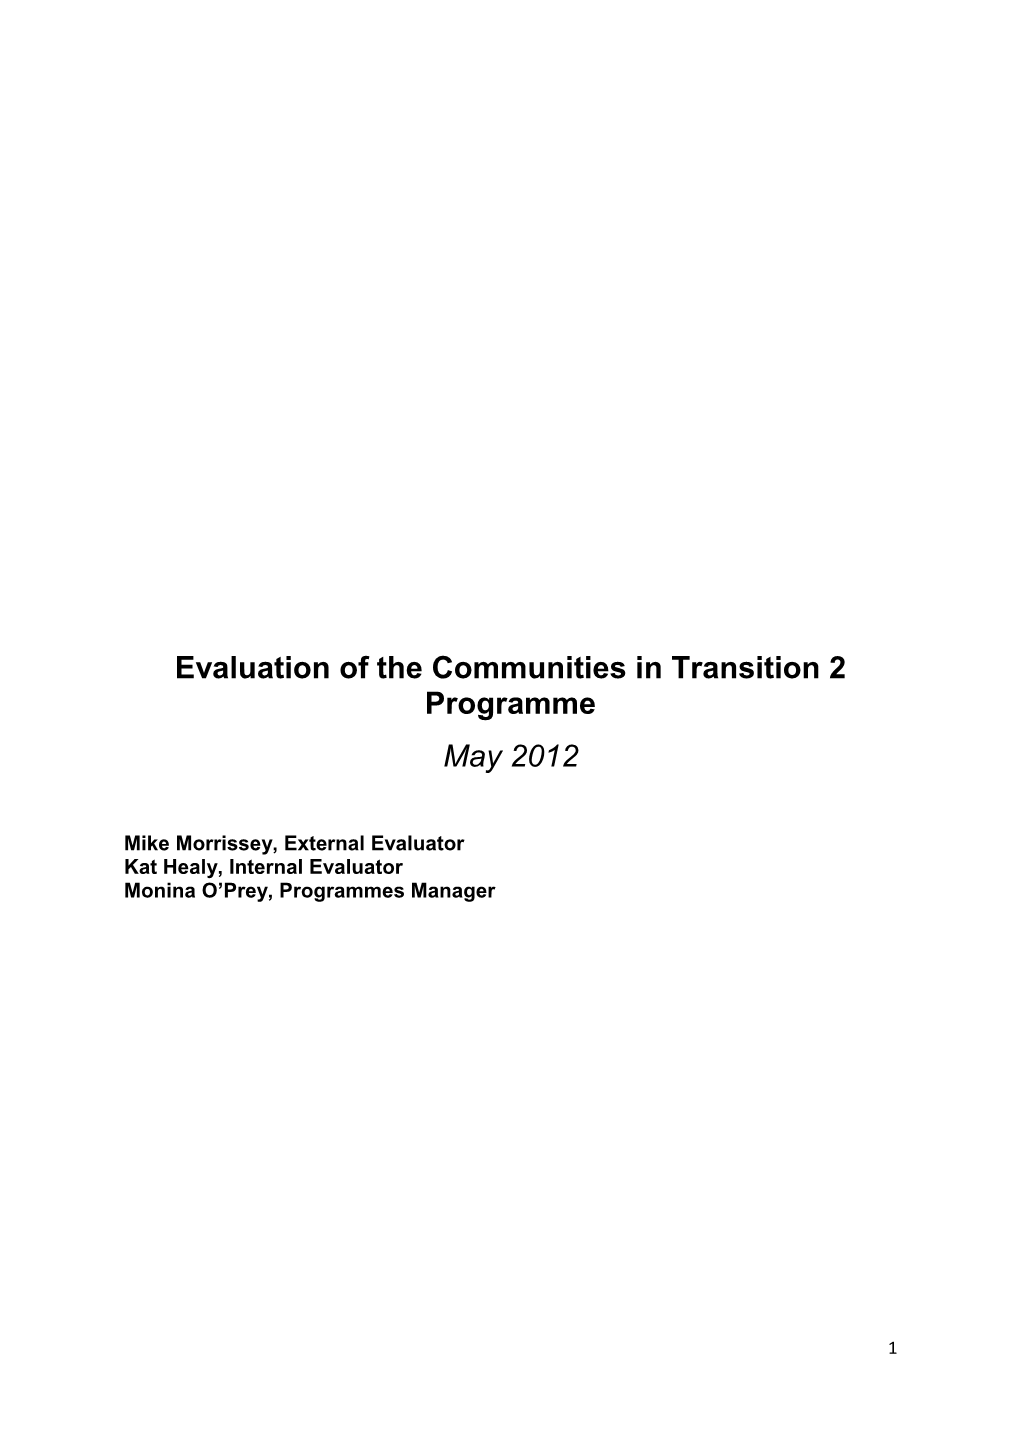 Evaluation of the Communities in Transition 2 Programme May 2012